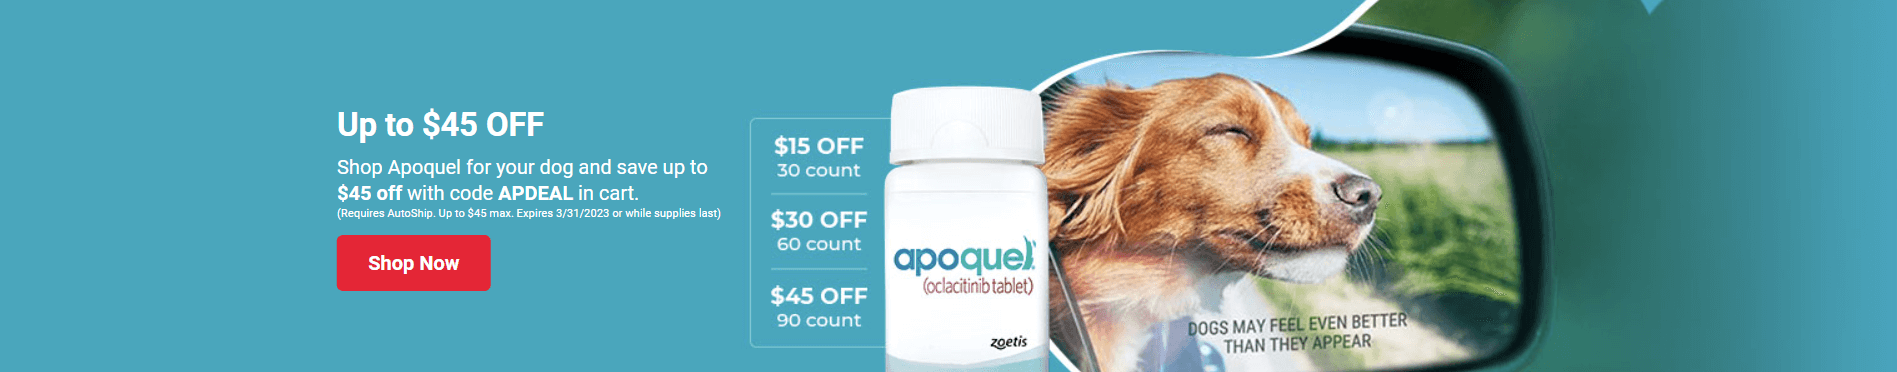 PetMeds - Up To $45 Off